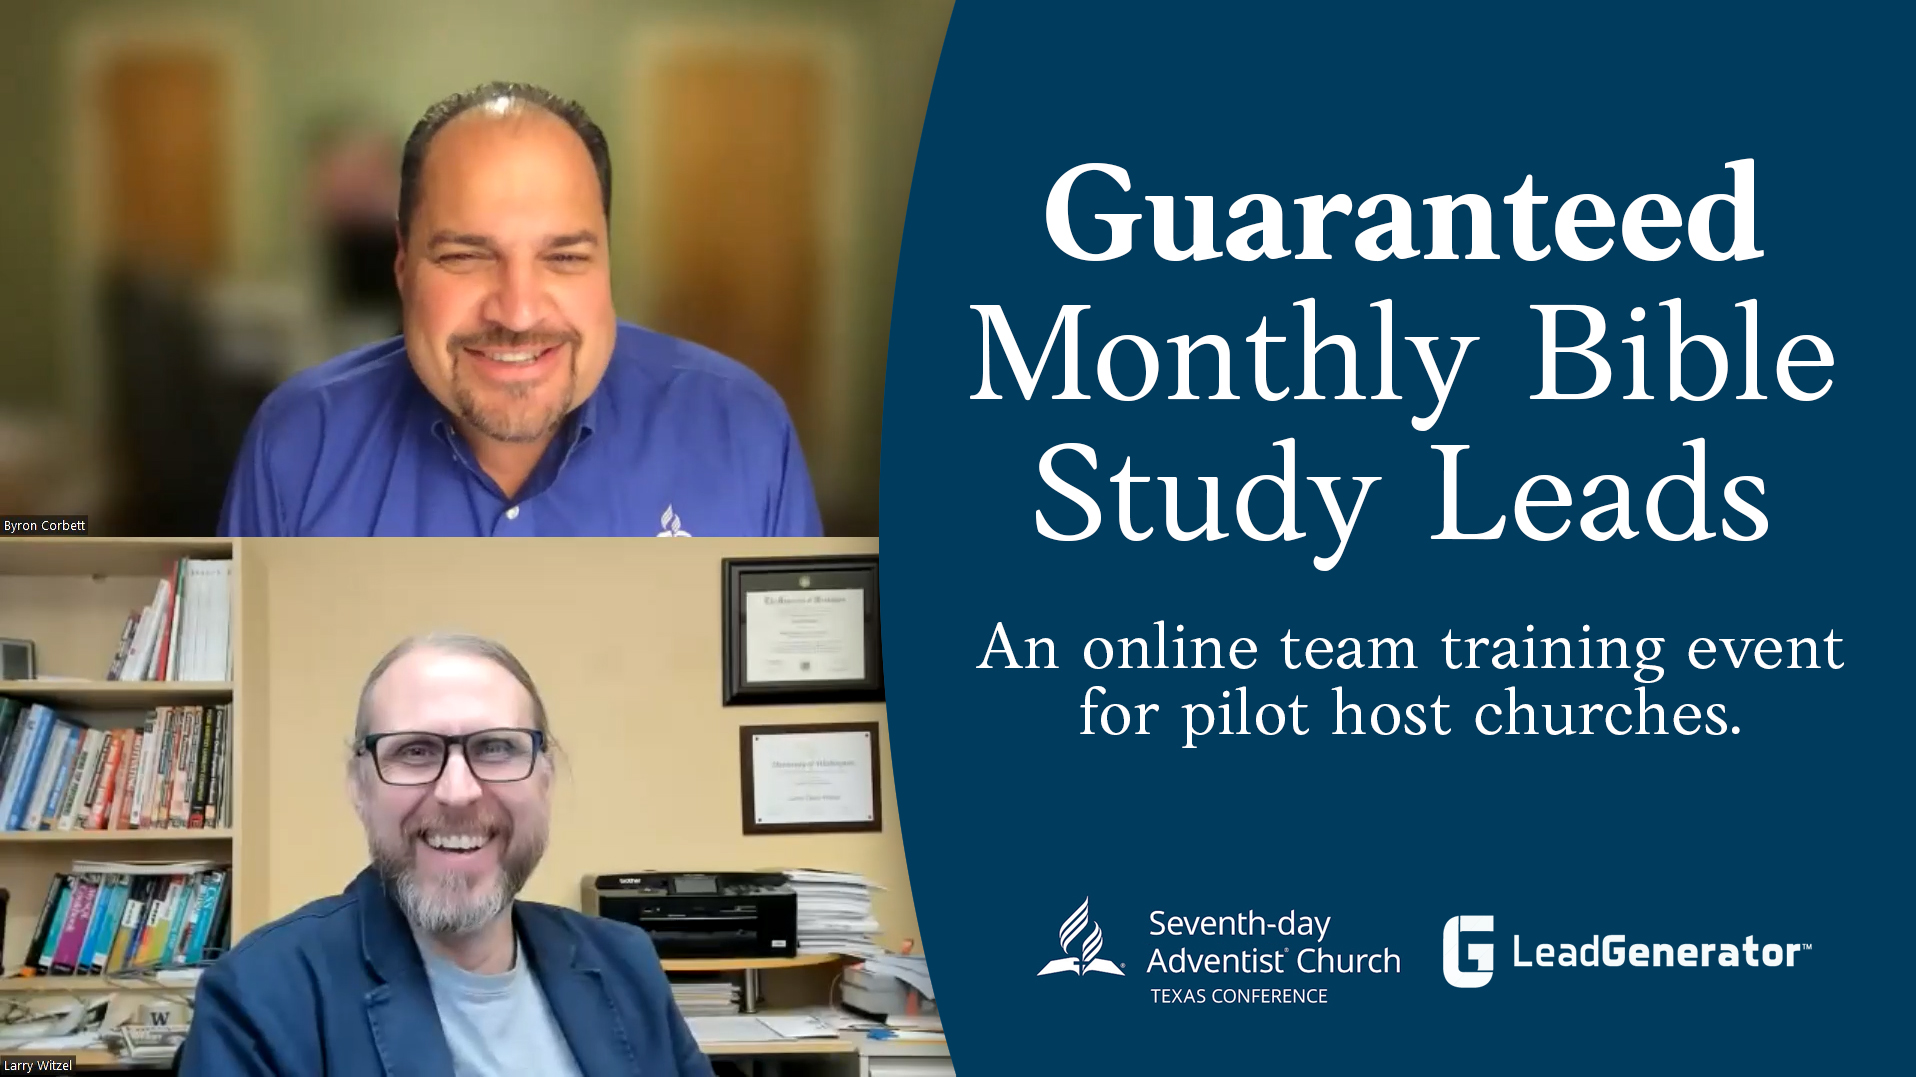 Featured image for “Guaranteed Monthly Bible Study Leads – A Texas Conference training event for pilot host churches.”